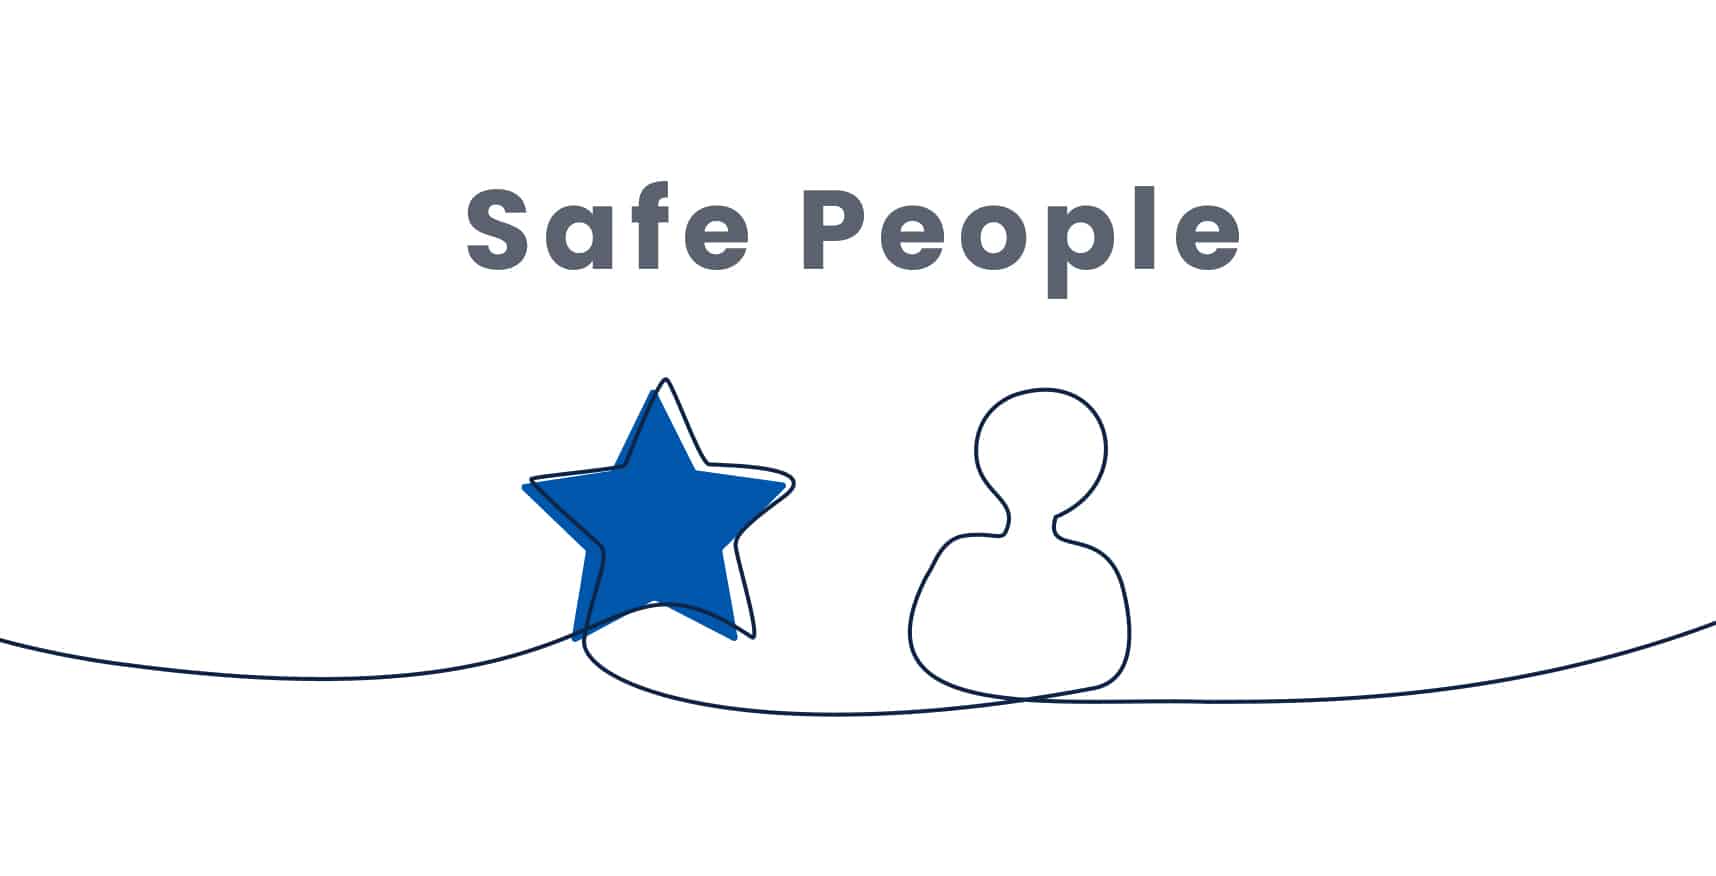 Illustration of the text "Safe People" above a blue star and an outlined person figure against a white background.